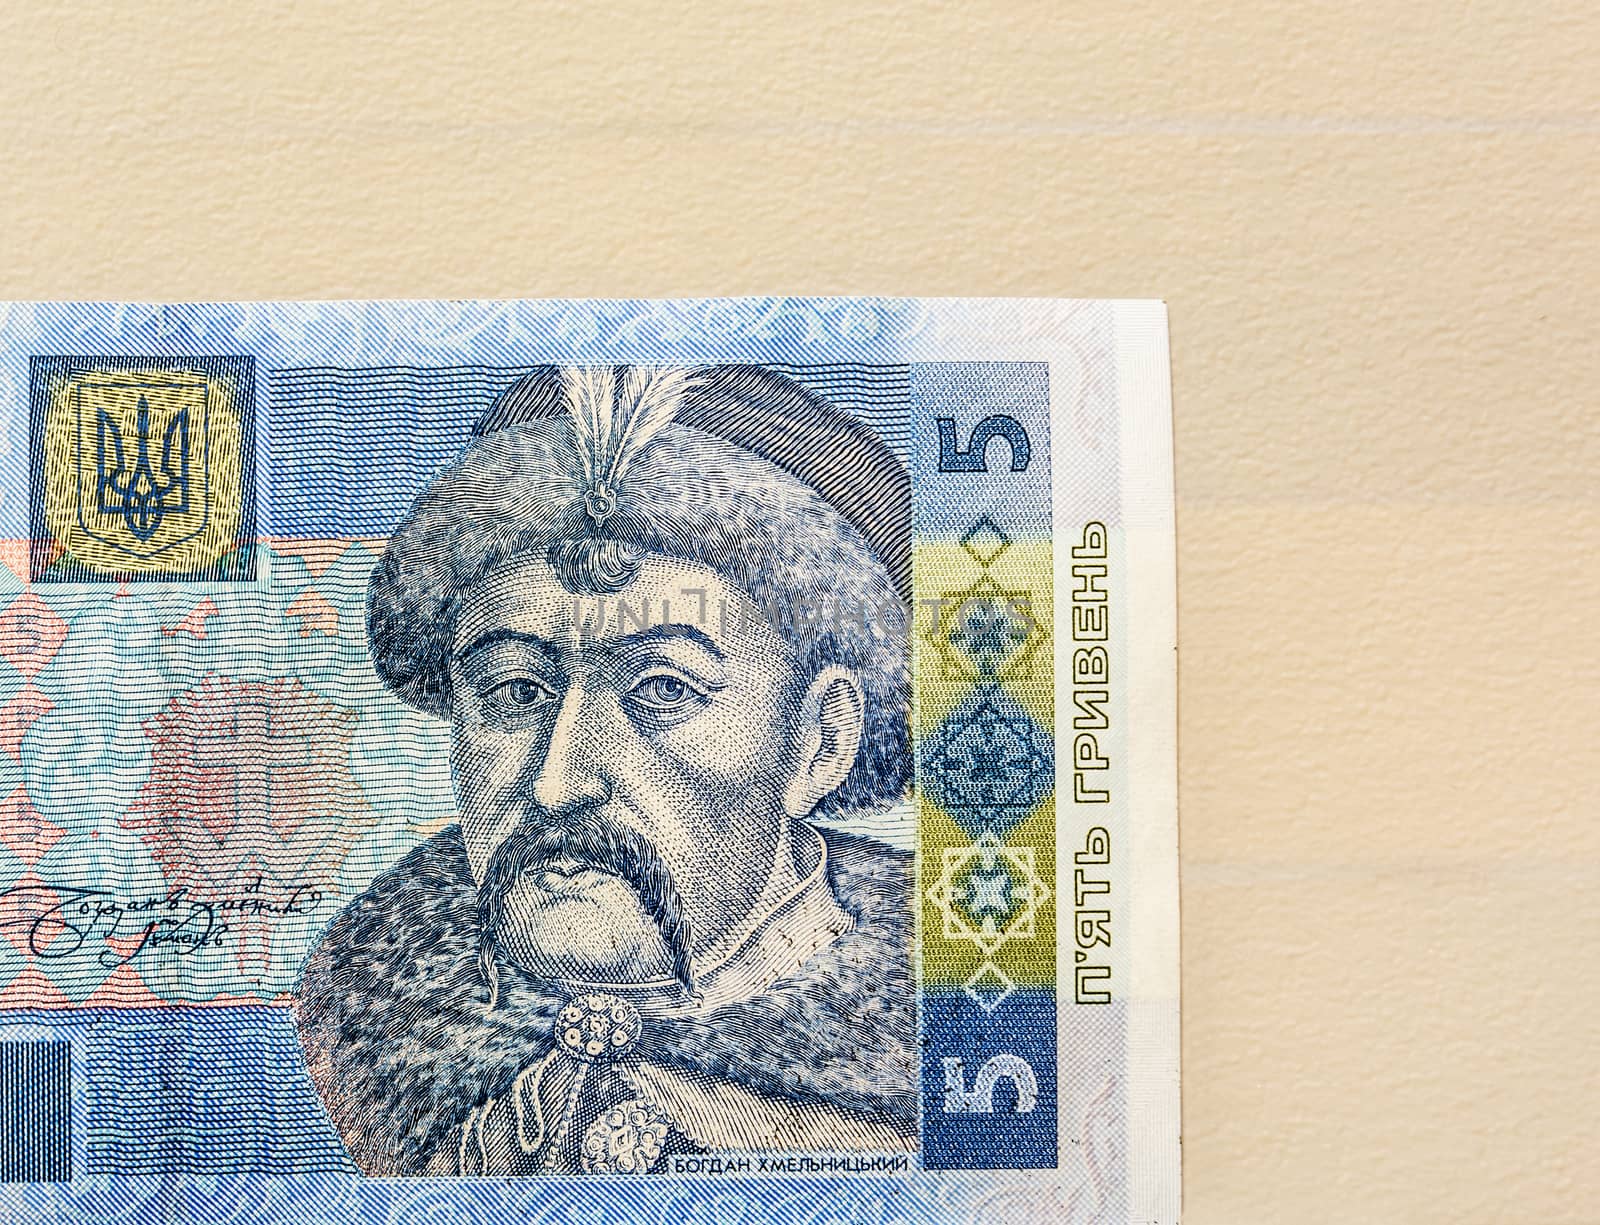 Part of the image with banknotes five hryvnia Ukraine by Grommik